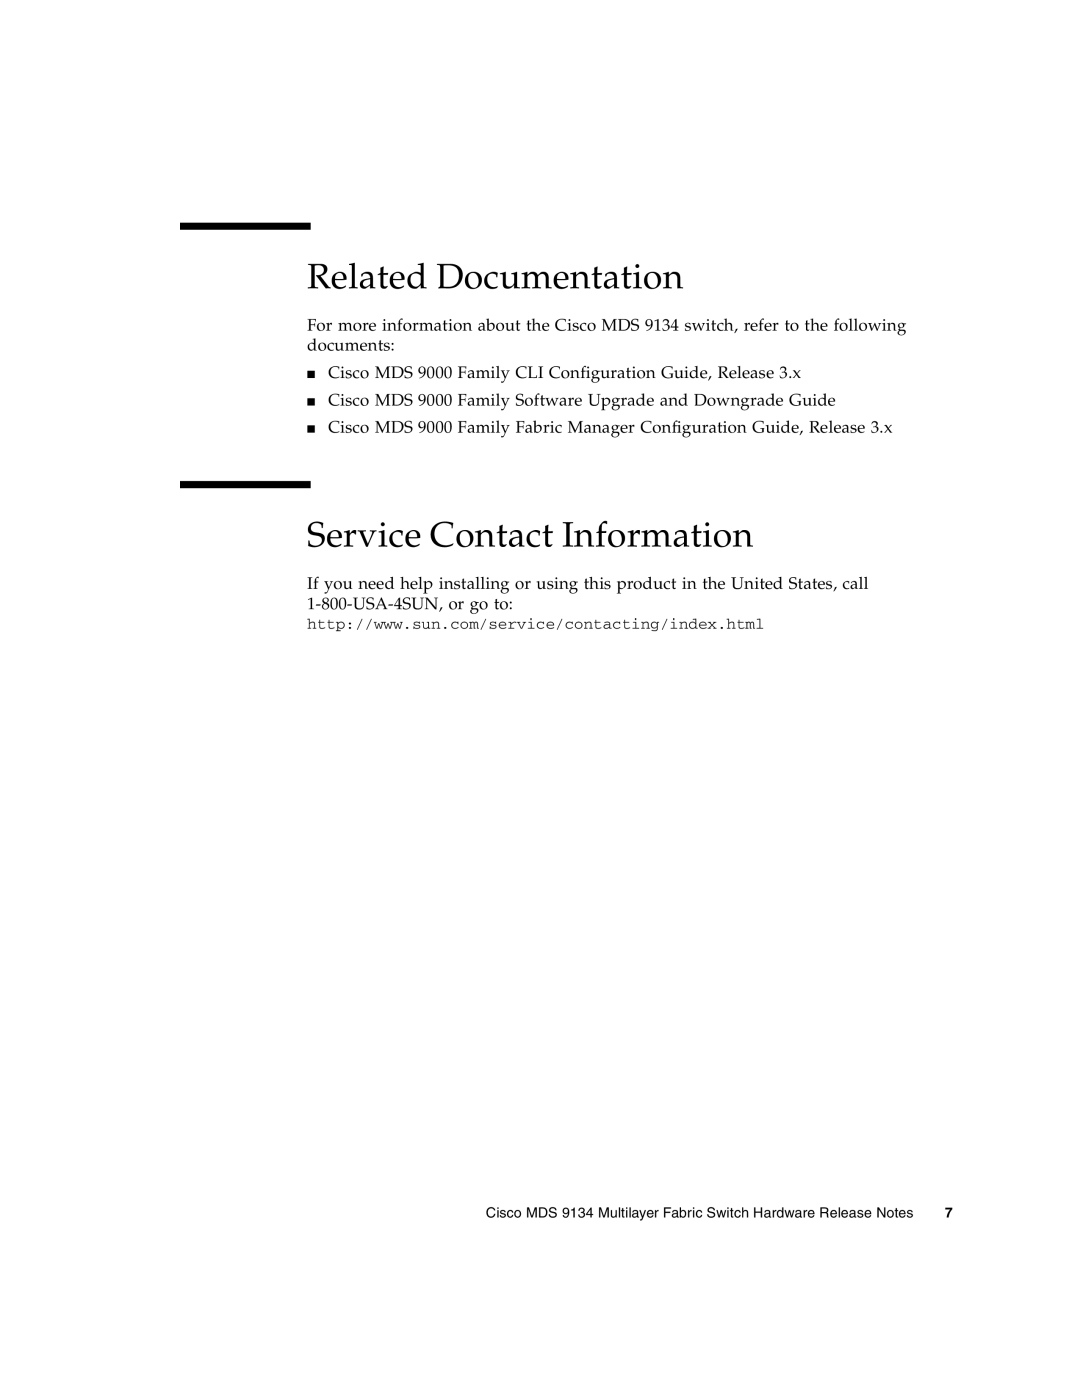 Sun Microsystems MDS 9134 manual Related Documentation, Service Contact Information 